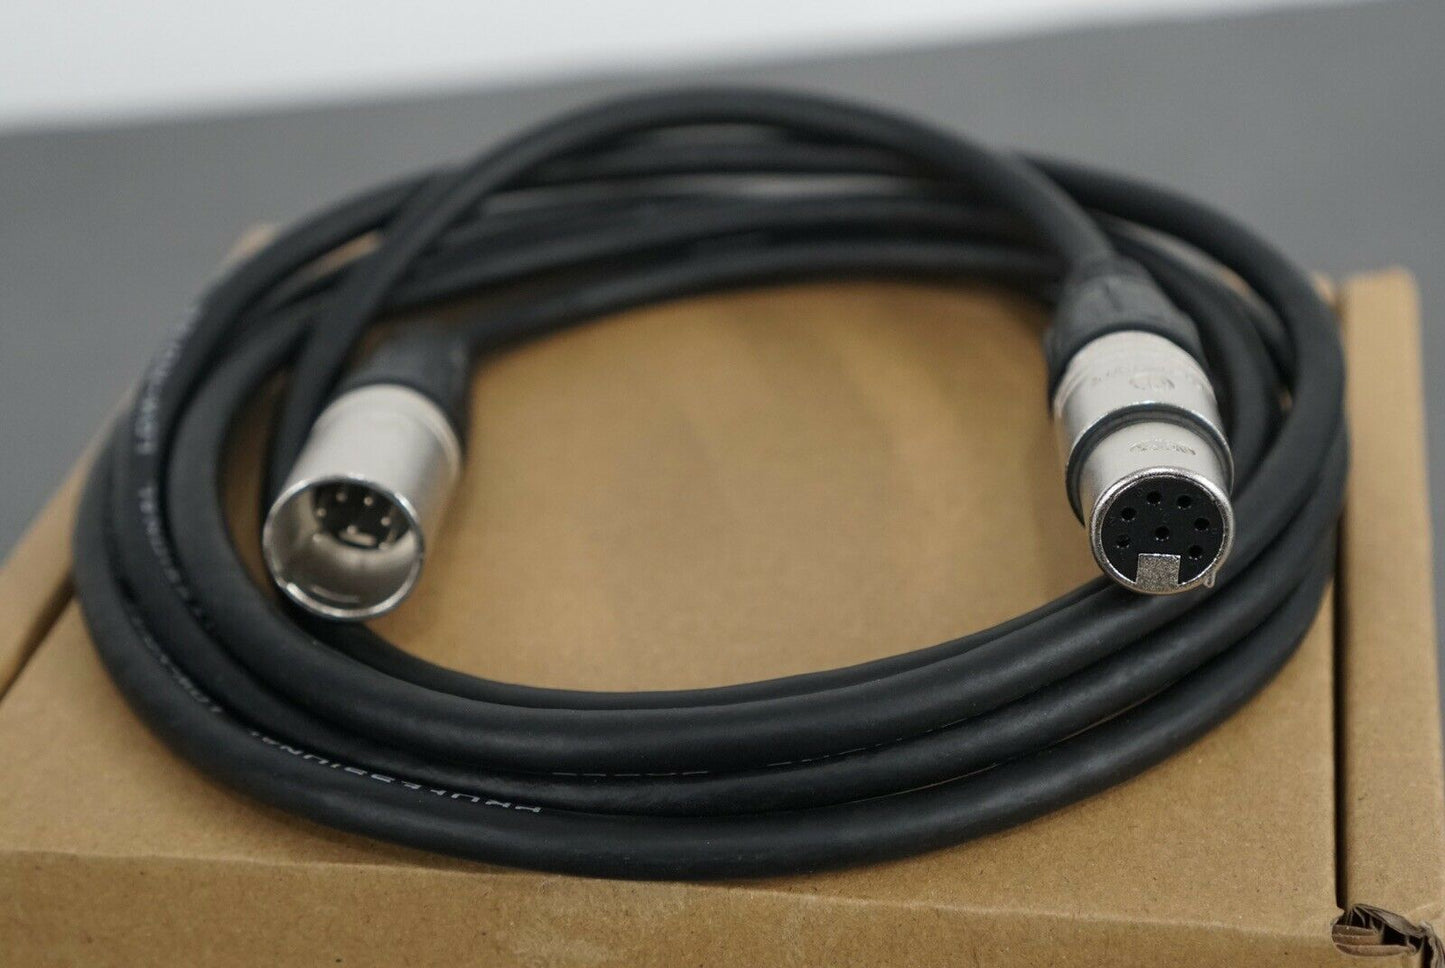 Avantone Pro 7 Pin Microphone Cable for CV12 - NEW